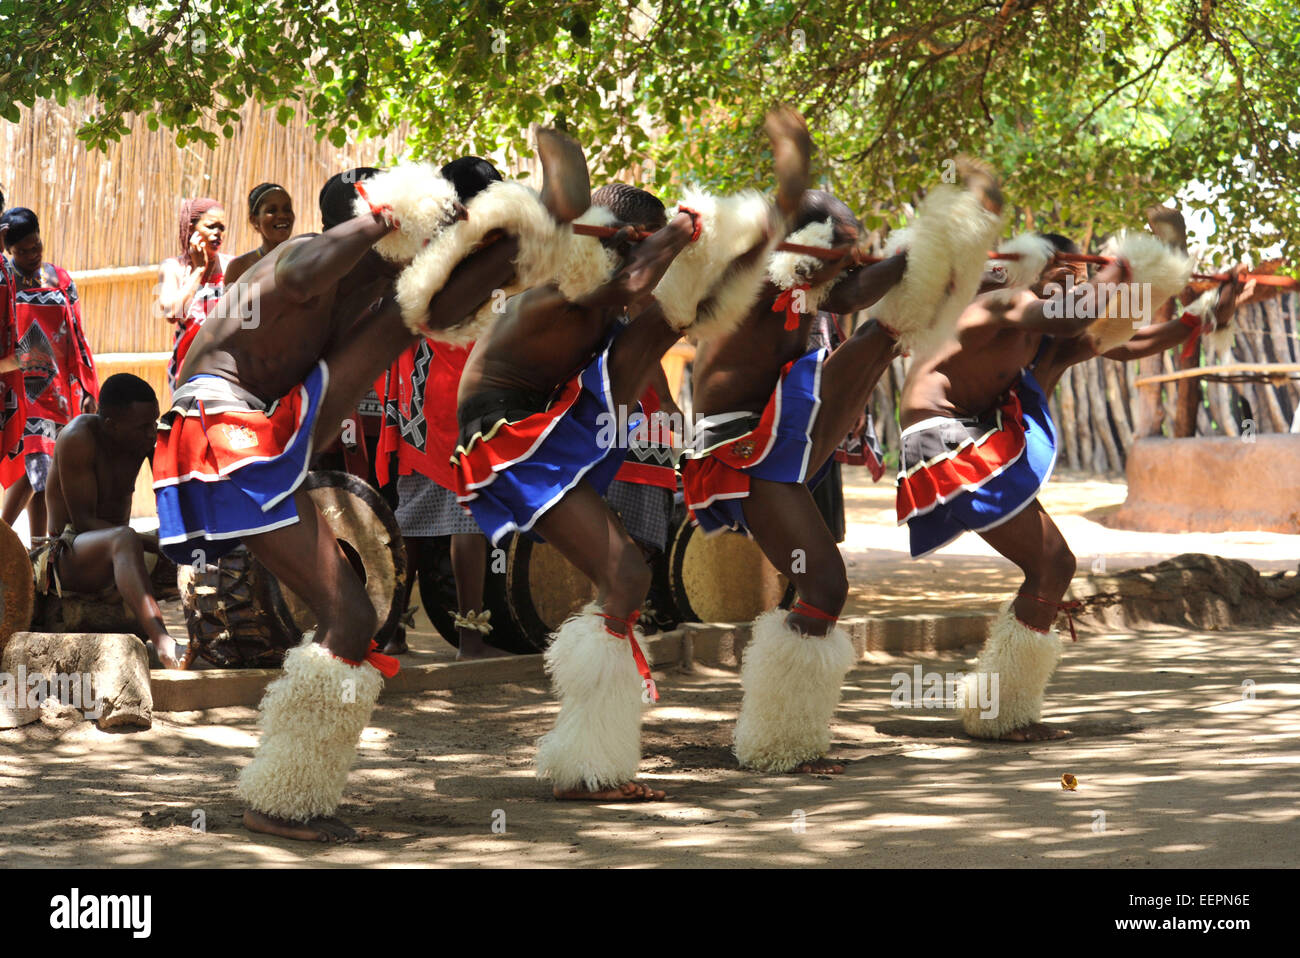 Matsamo, Swaziland, group of Swazi male traditional dancers perform synchronised high kick during war dance tourists at Matsamo Swaziland Cultures Stock Photo